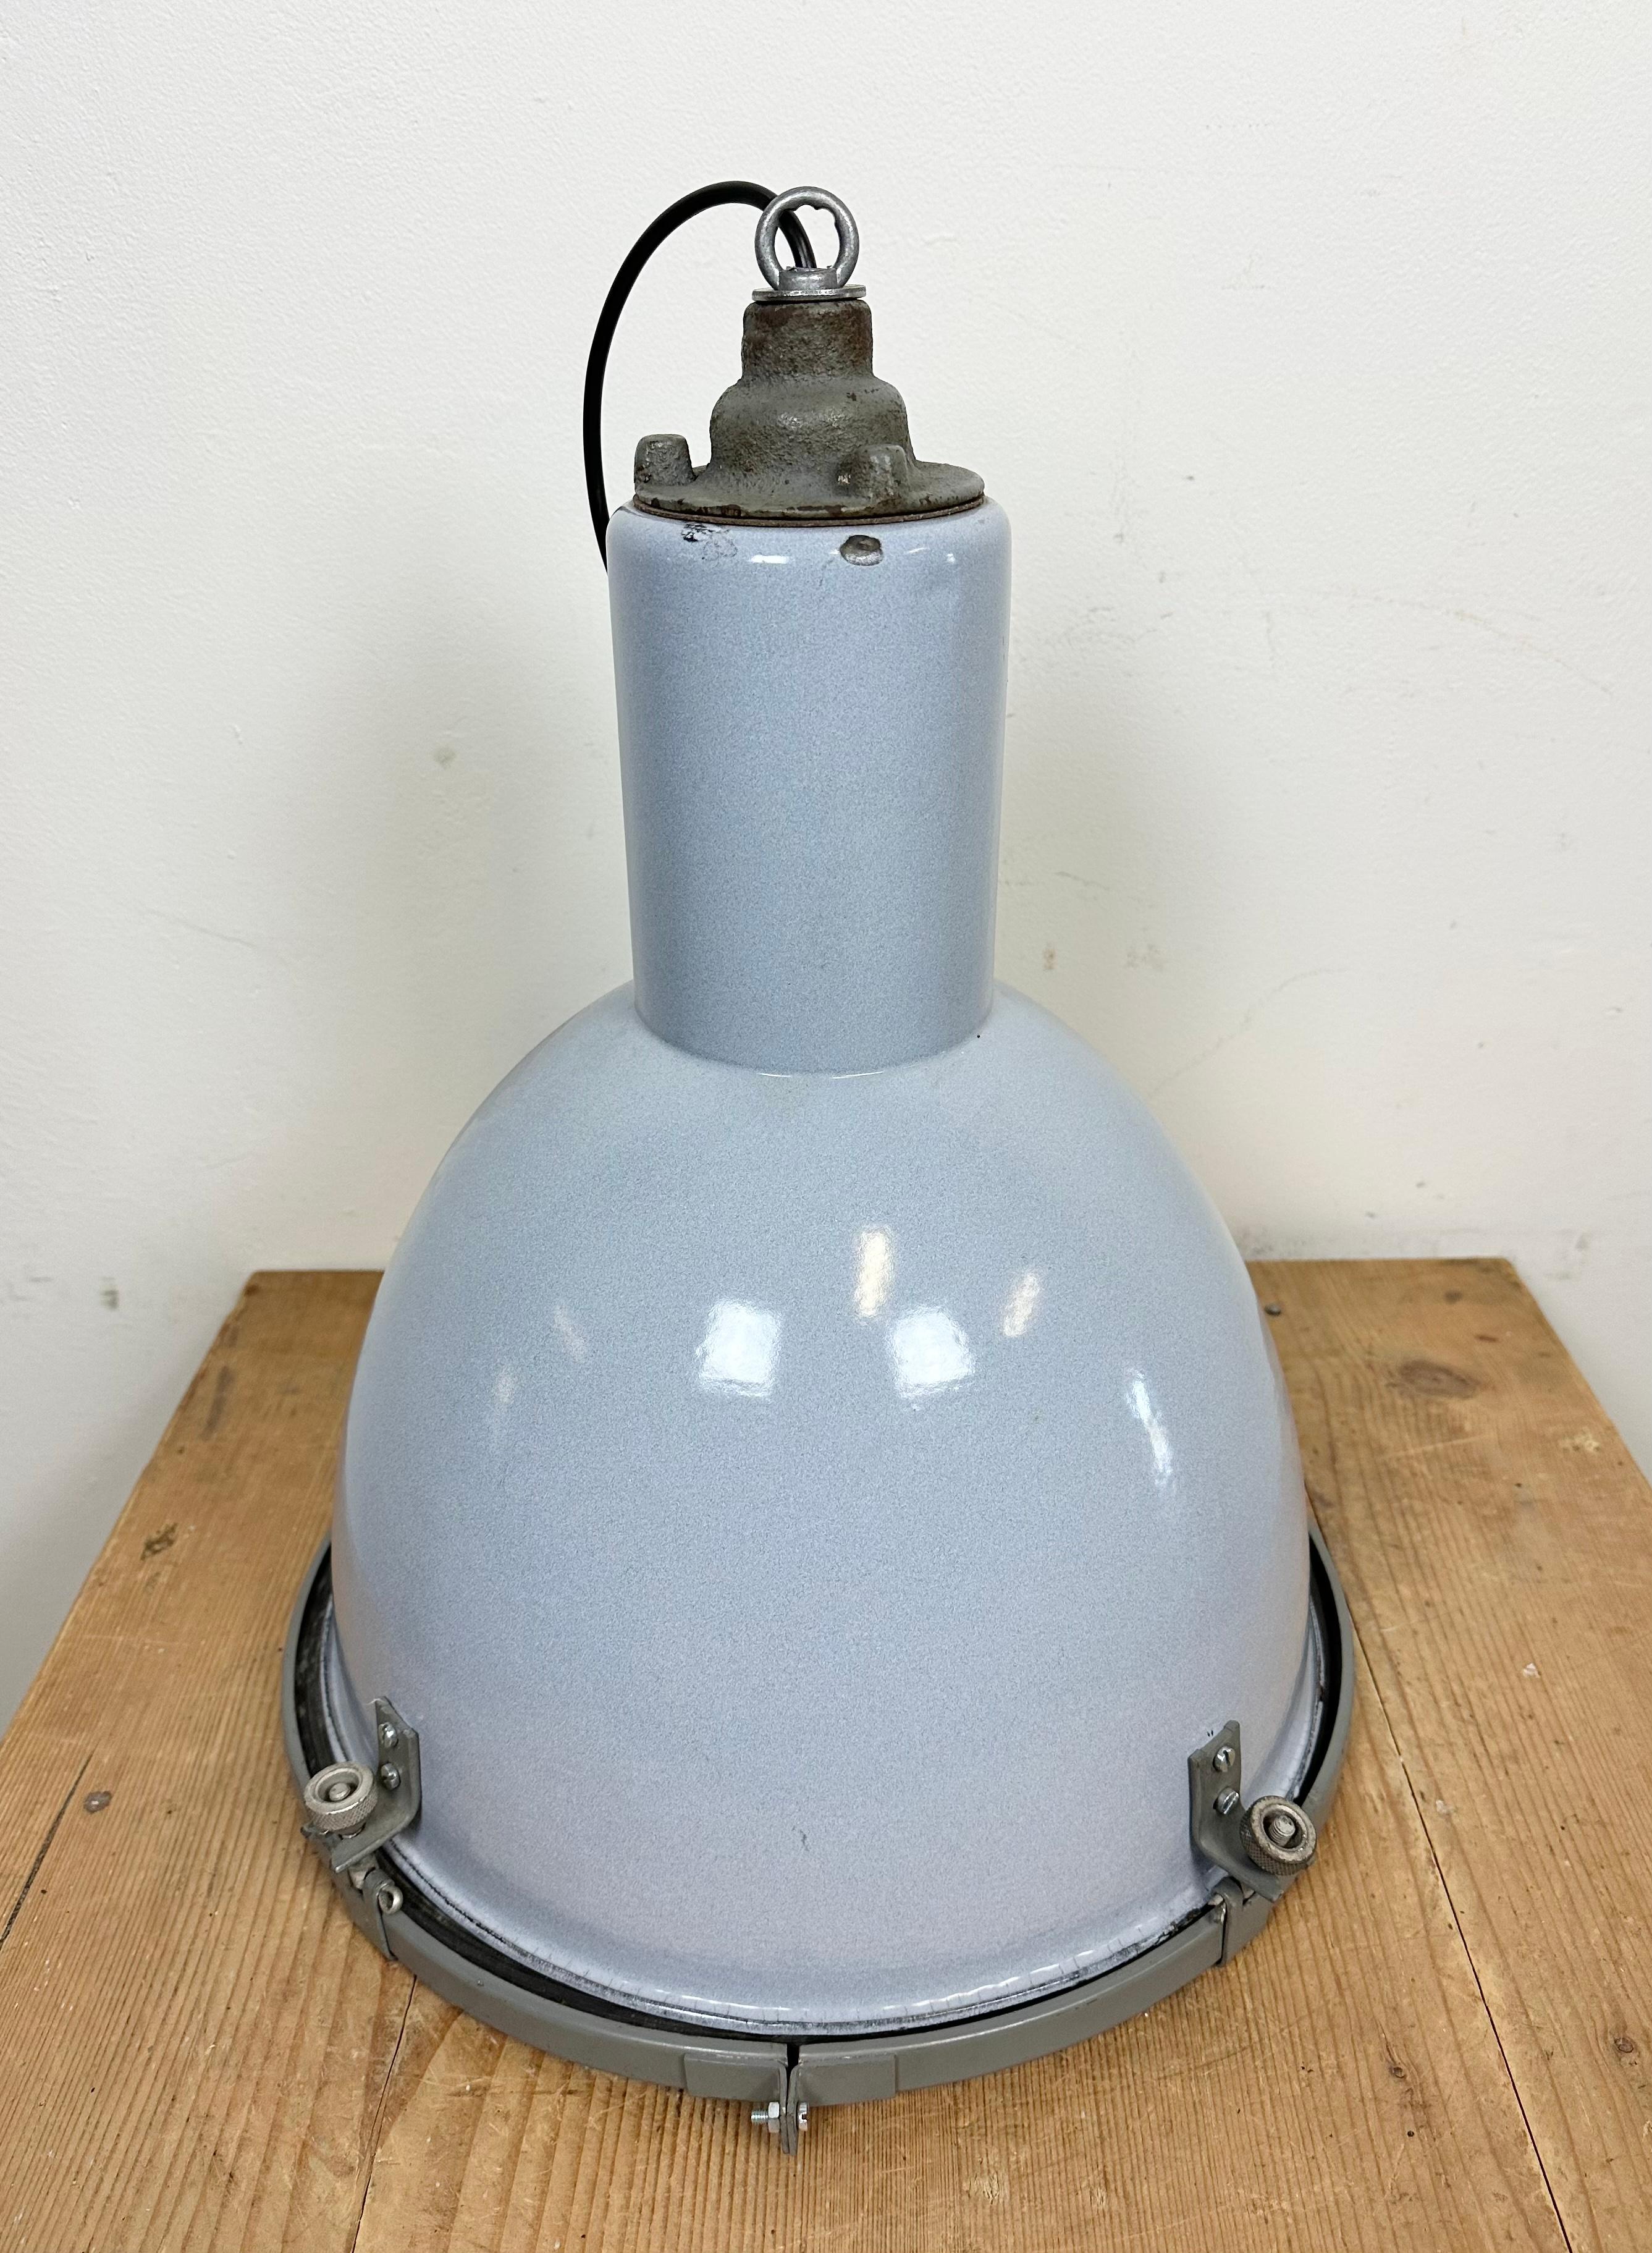 Bauhaus Grey Enamel Industrial Pendant Lamp with Glass Cover, 1950s For Sale 7